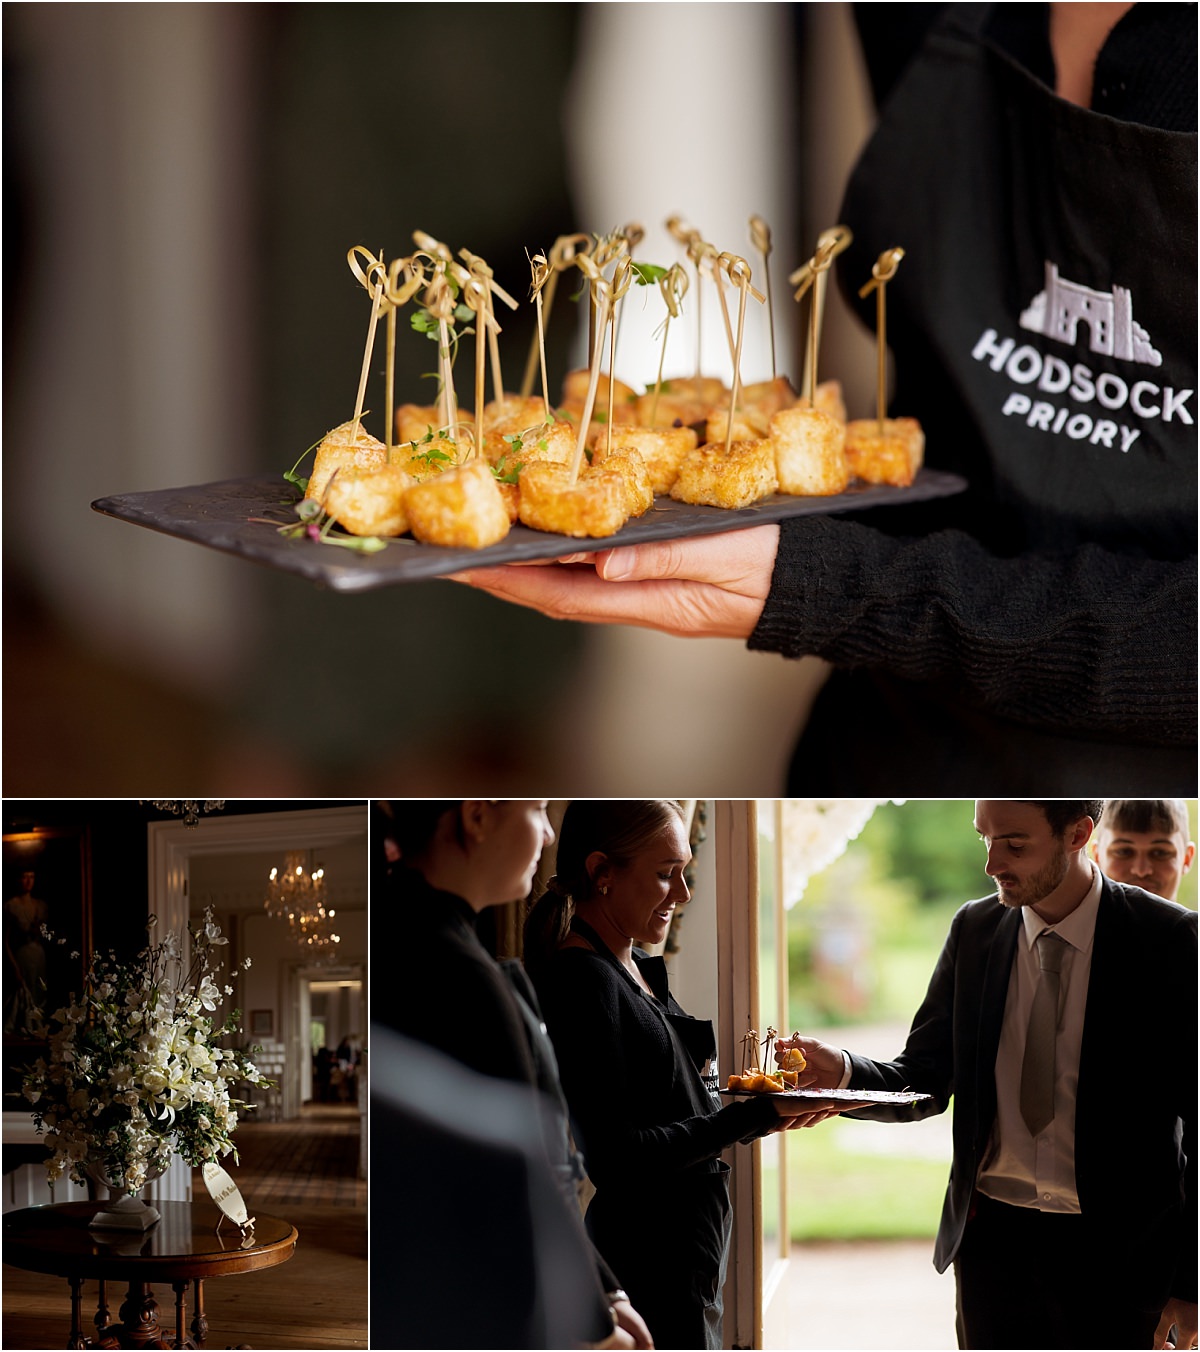 Hodsock Priory canapes